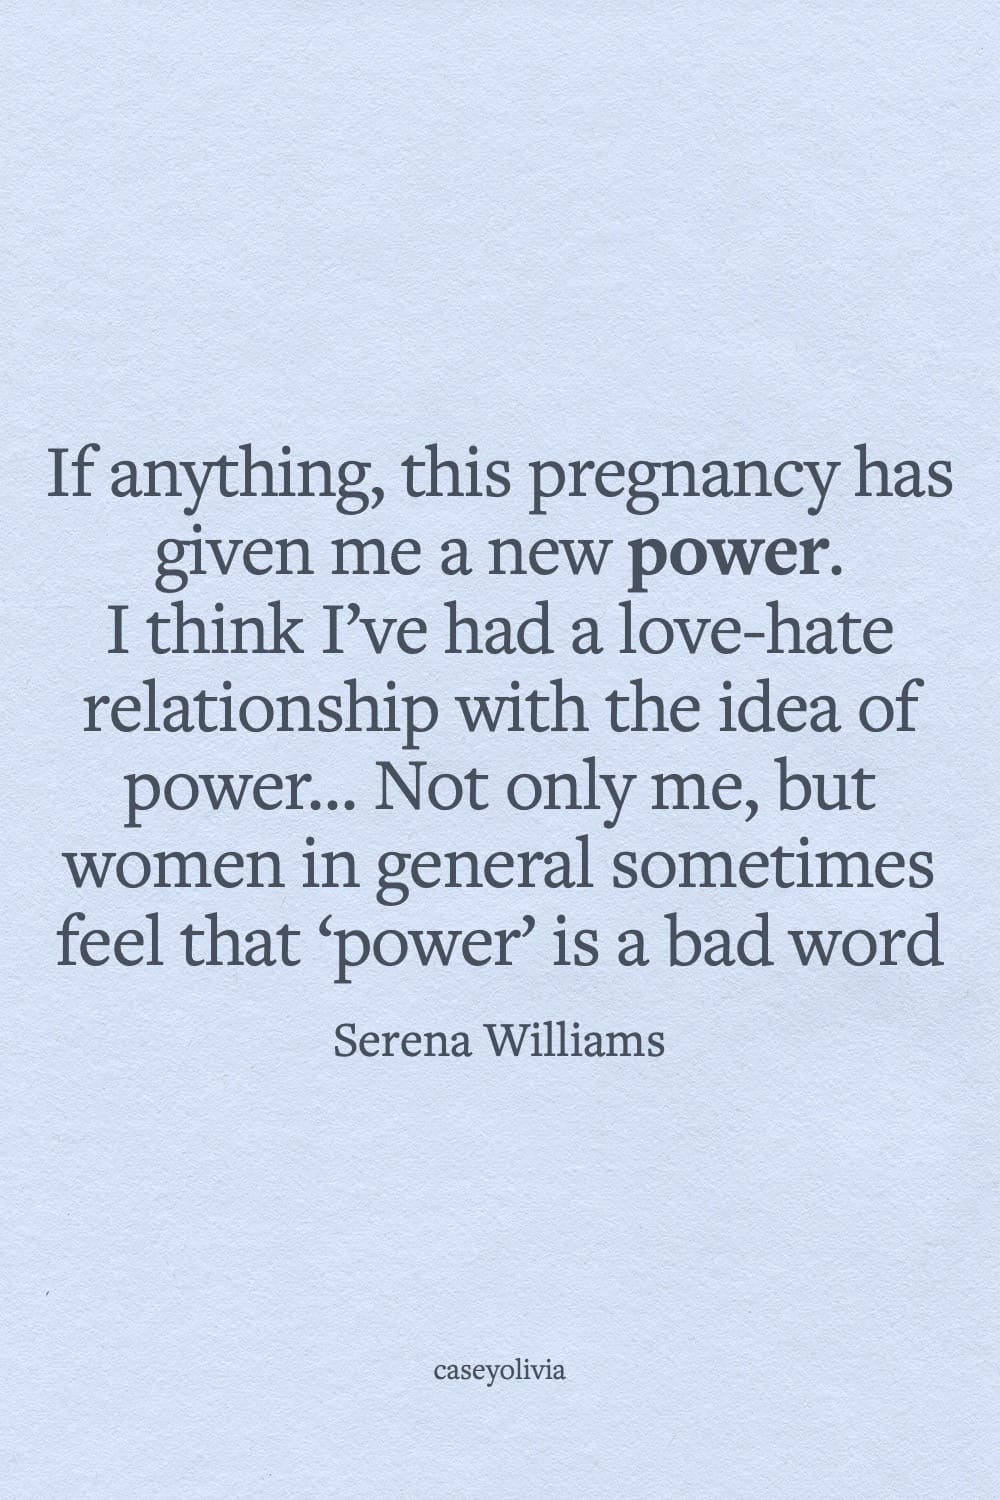 serena williams pregnancy quote about motherhood